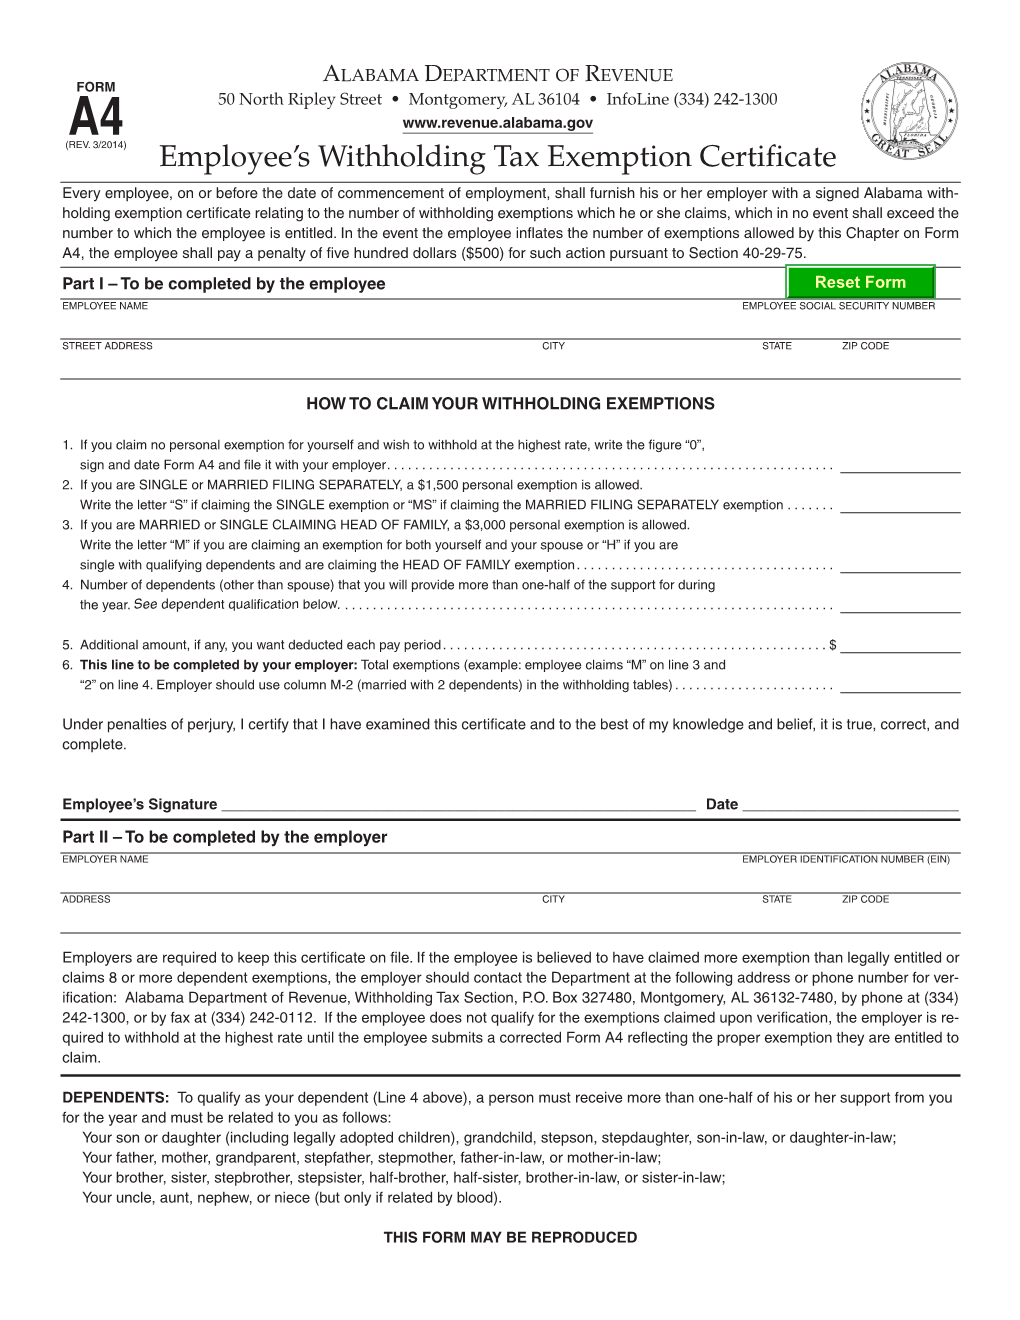 Employee's Withholding Tax Exemption Certificate